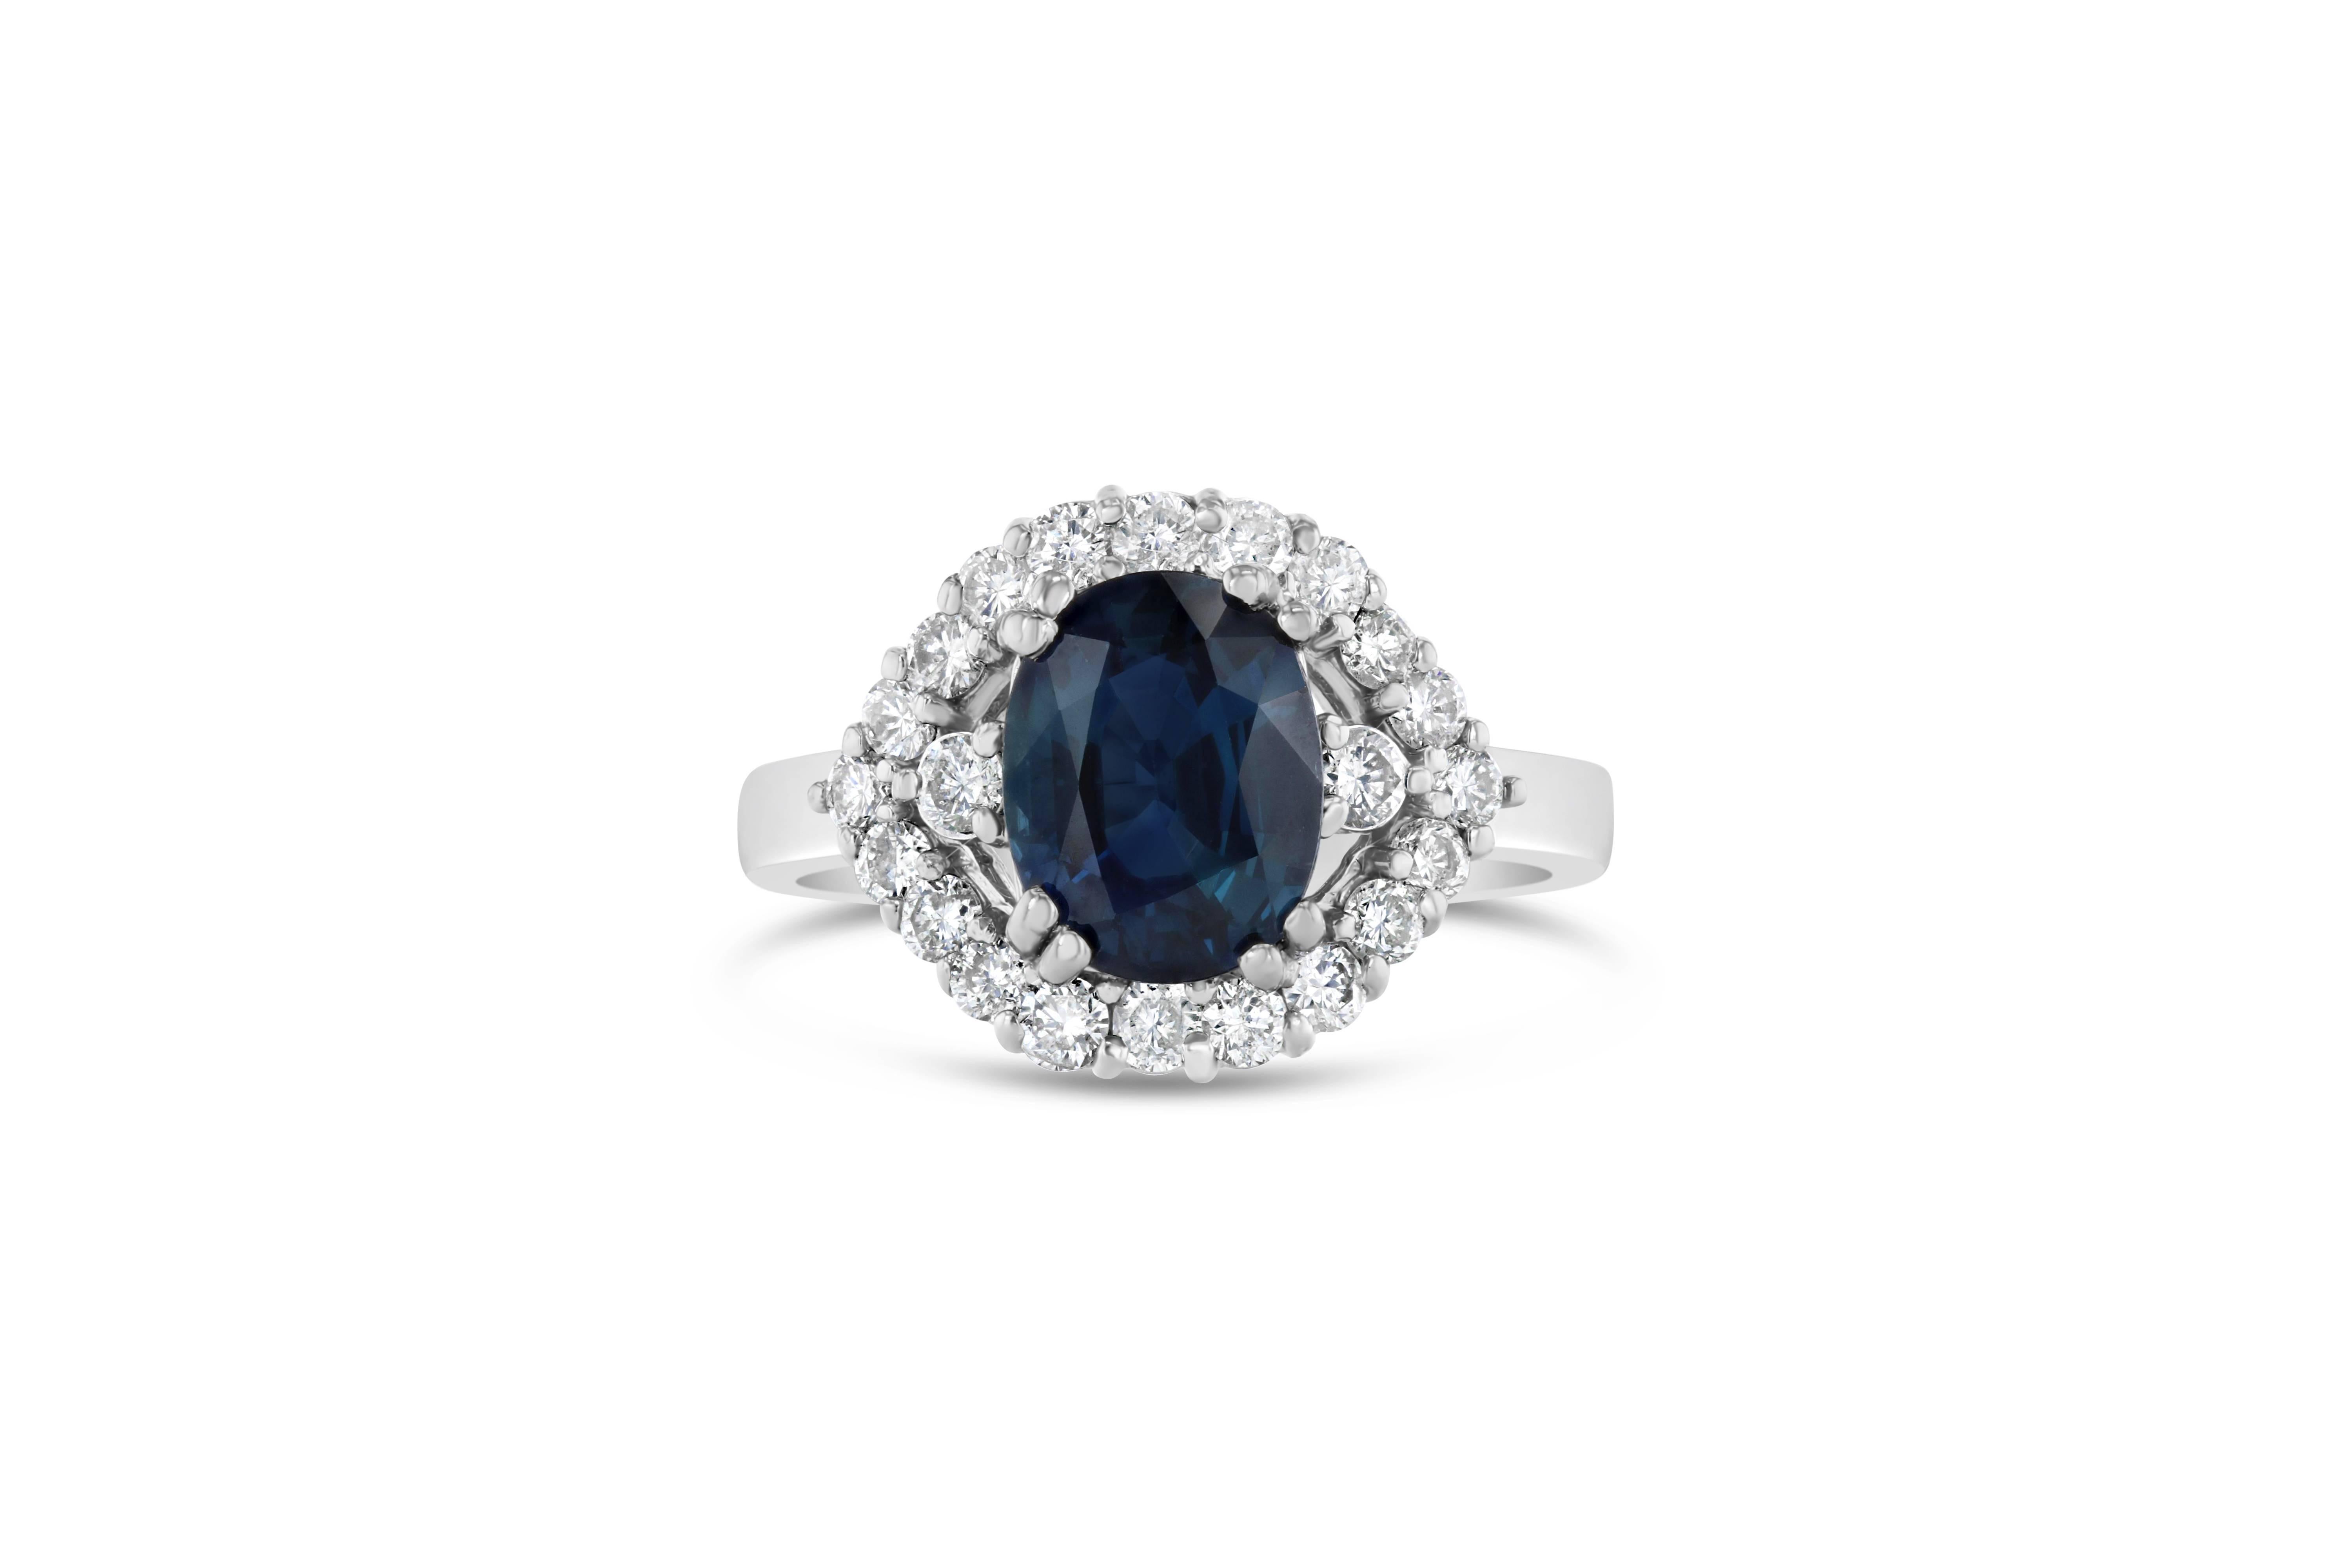 Beautiful Blue Sapphire and Diamond Cluster Ring!  This ring has a 2.67 carat Oval Cut Blue Sapphire in the center of the ring and is surrounded by 22 Round Cut Diamonds that weigh 0.73 carats.  The clarity and color is VS2/H.  This ring is casted